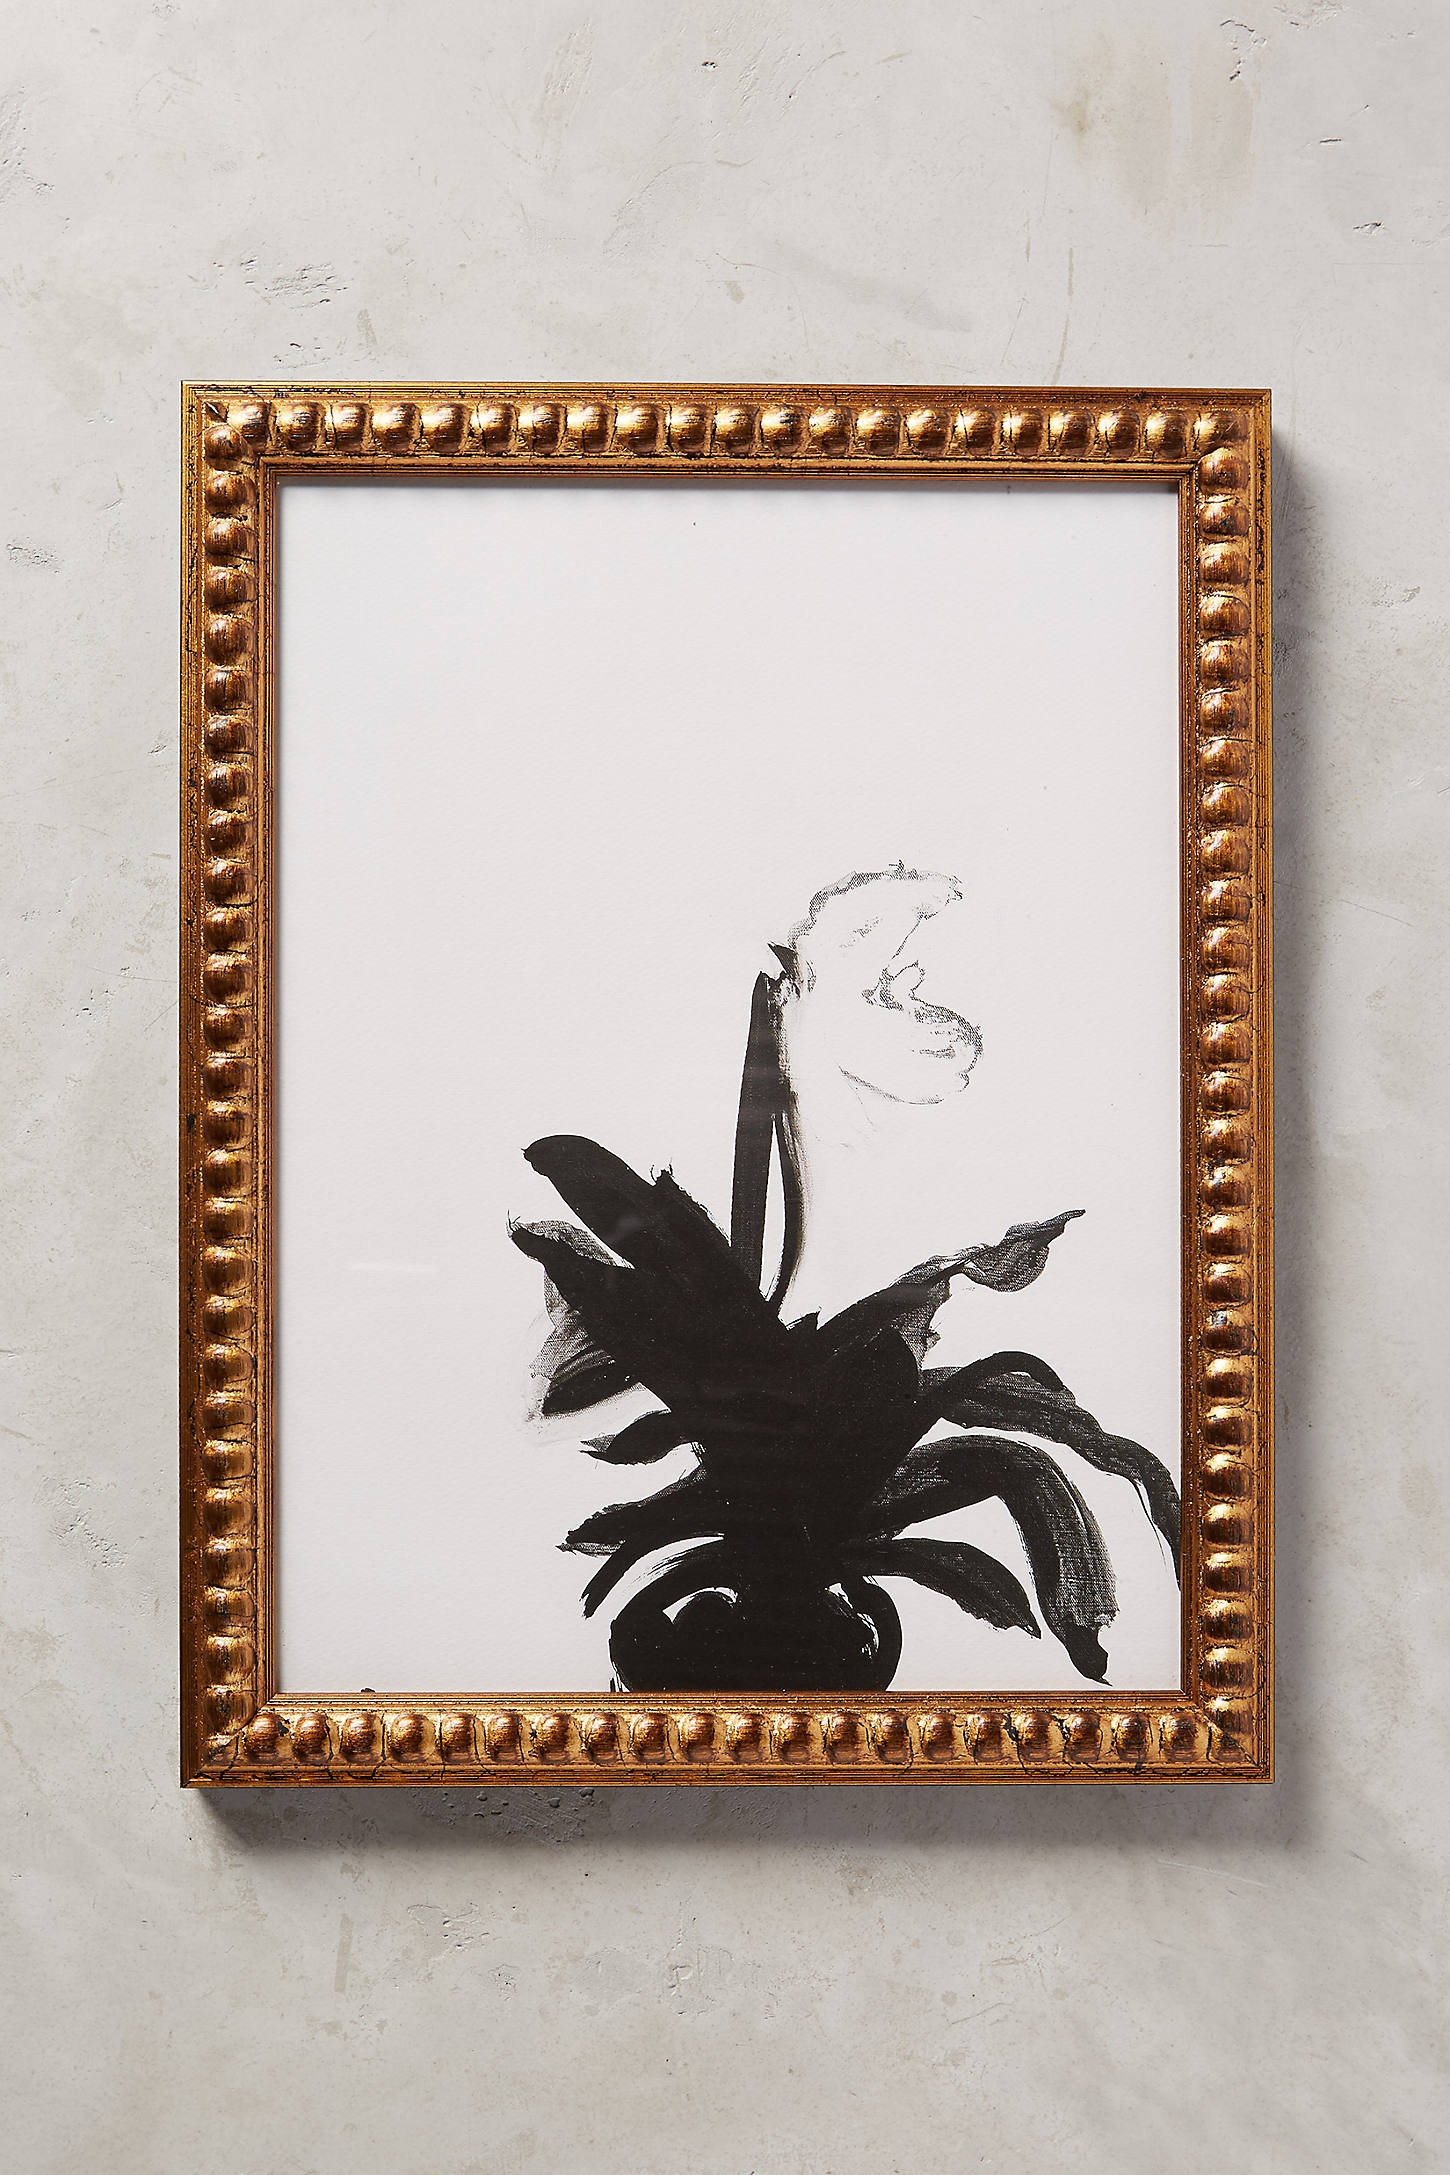 The Orchid Wall Art By Artfully Walls in Black - Image 0